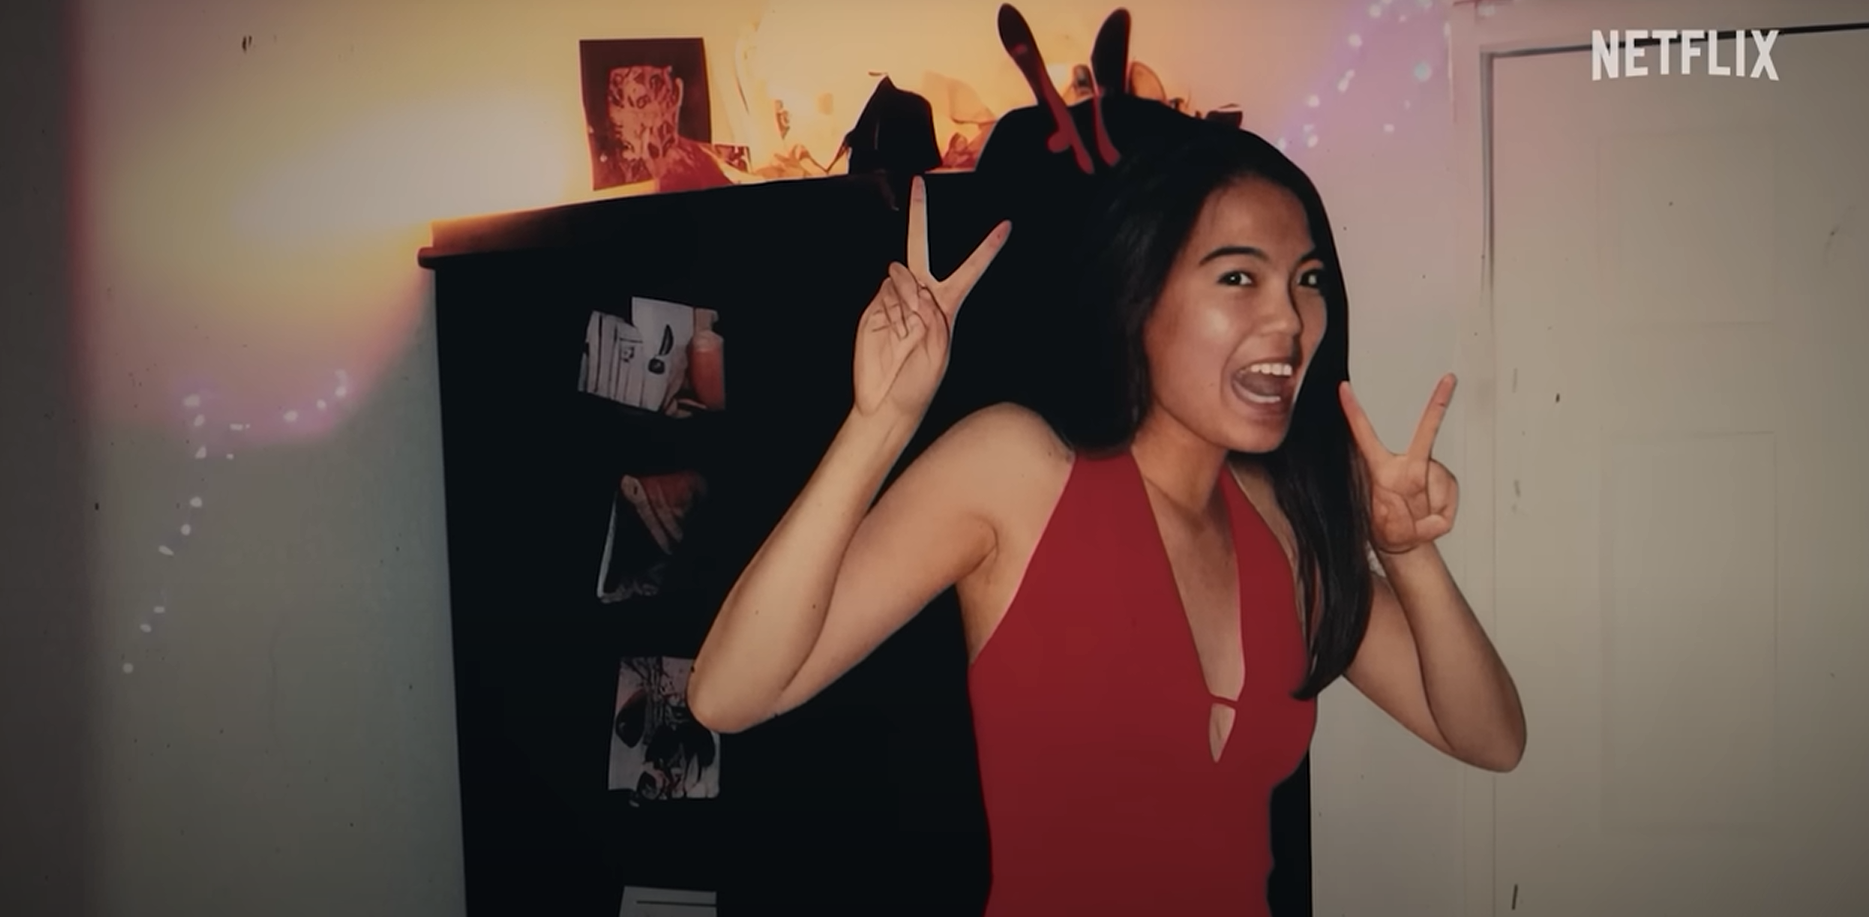 Screenshot of Jennifer Pan from Netflix documentary "What Jennifer Did". A young woman in a red dress stands in a room with a playful expression, making peace signs with both hands. The lighting casts colorful flares across the room, and there are various items and pictures on a dark shelf behind her. "NETFLIX" is displayed in the upper right corner, suggesting this is a screenshot from a Netflix production. A close-up of the same young woman, smiling broadly with her head tilted slightly. She's wearing a red dress, dangling earrings, and has her hand on her shoulder. The background is dark with a few light orbs, indicative of a low-lit environment. "NETFLIX" is visible in the upper right corner, indicating this is also from a Netflix show.